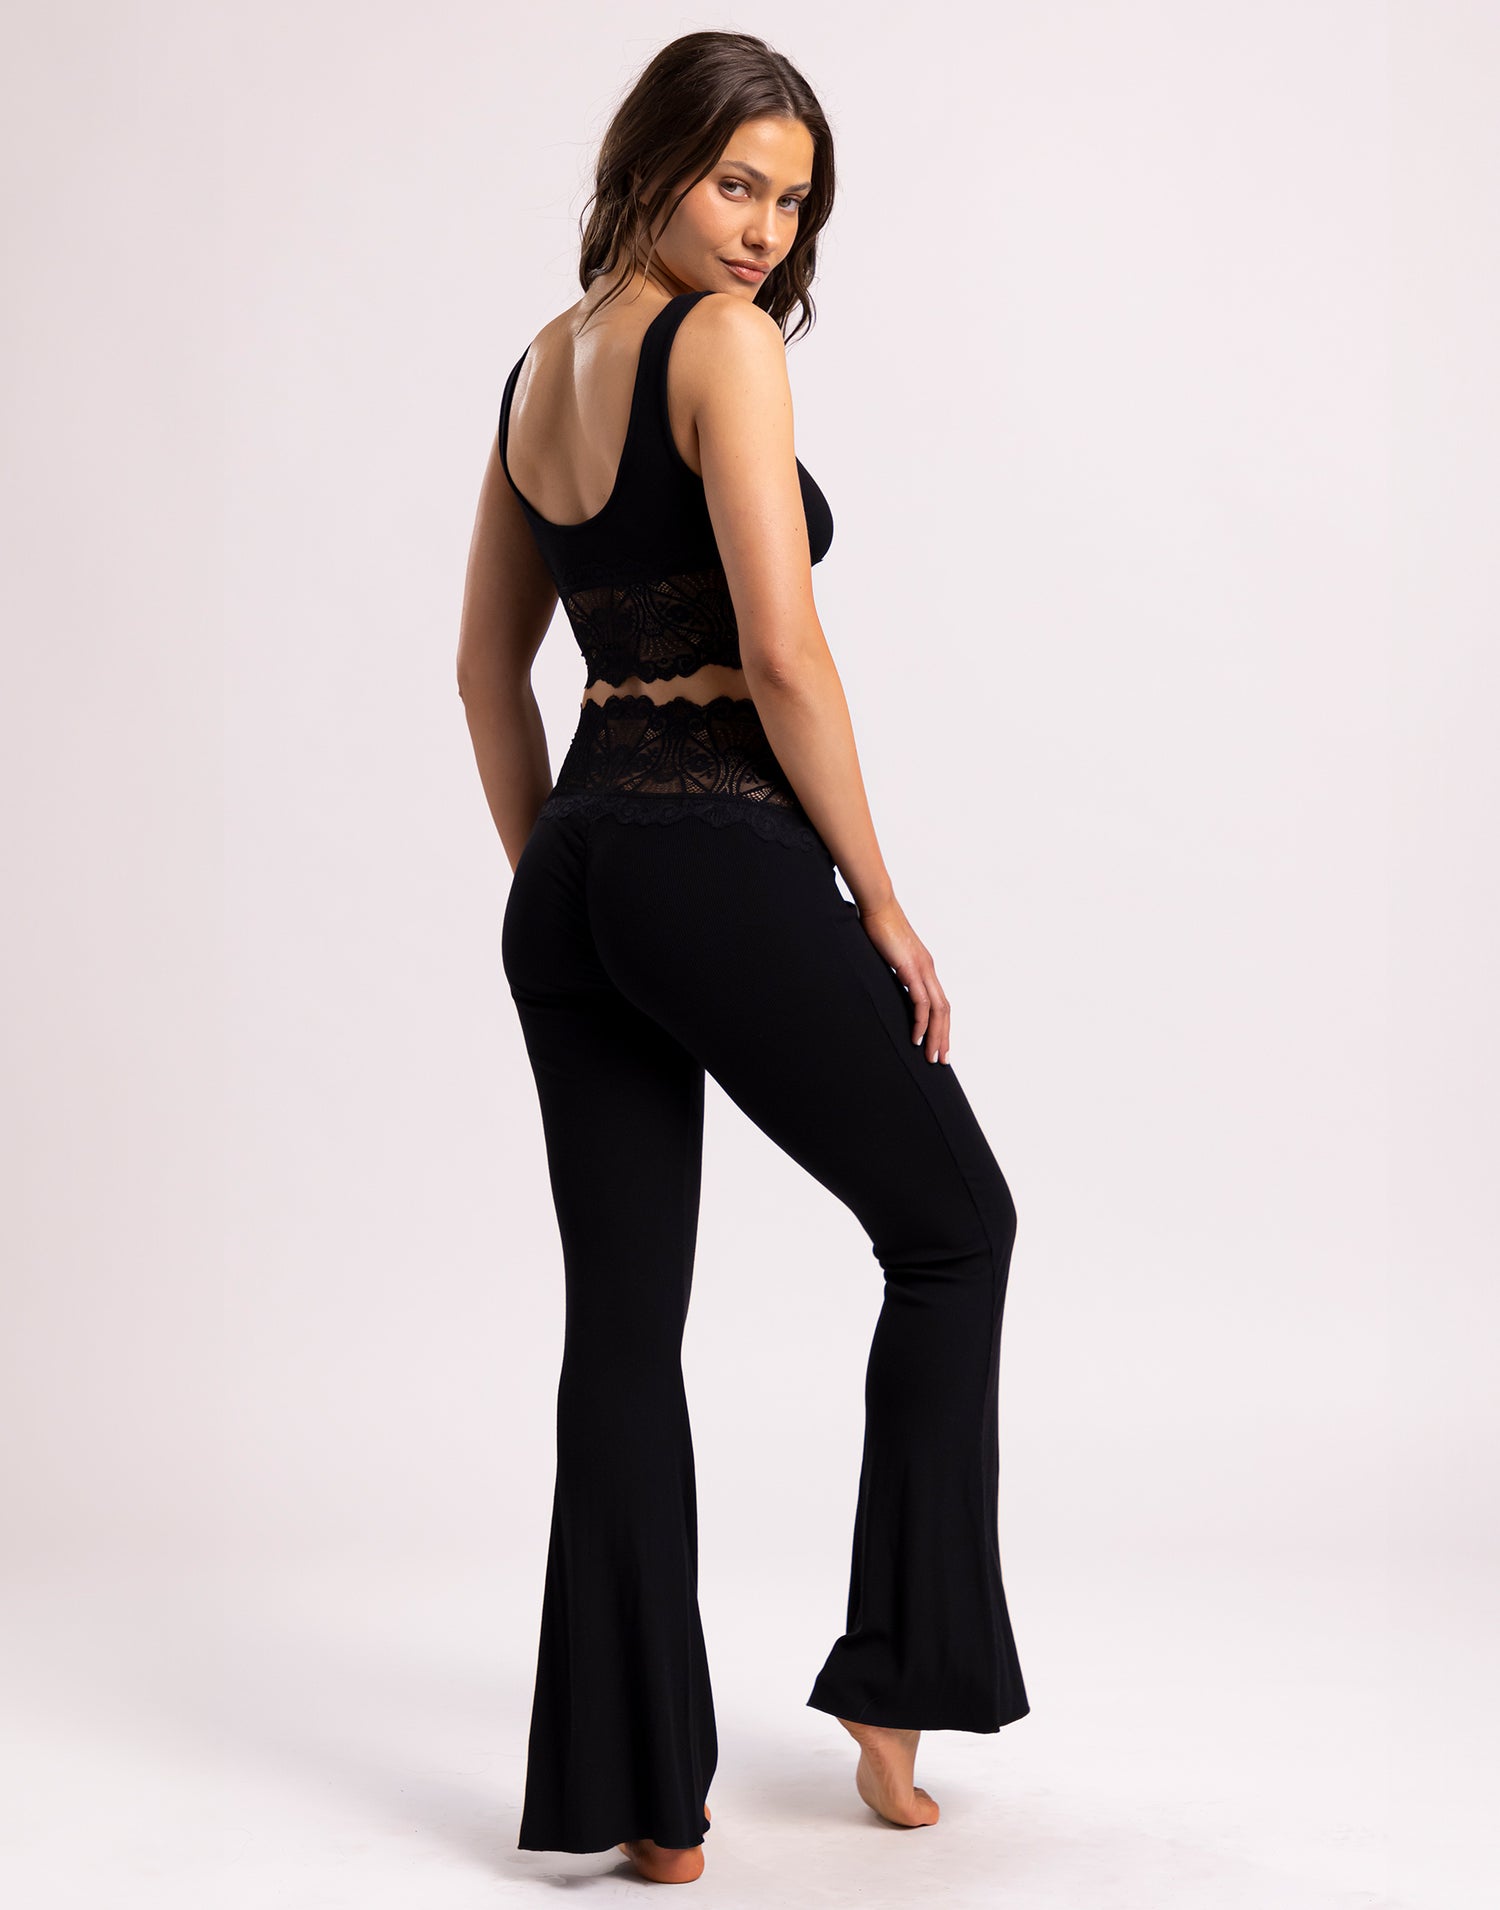 Anise Lounge Pant in Black with Delicate Lace Trim - Back View